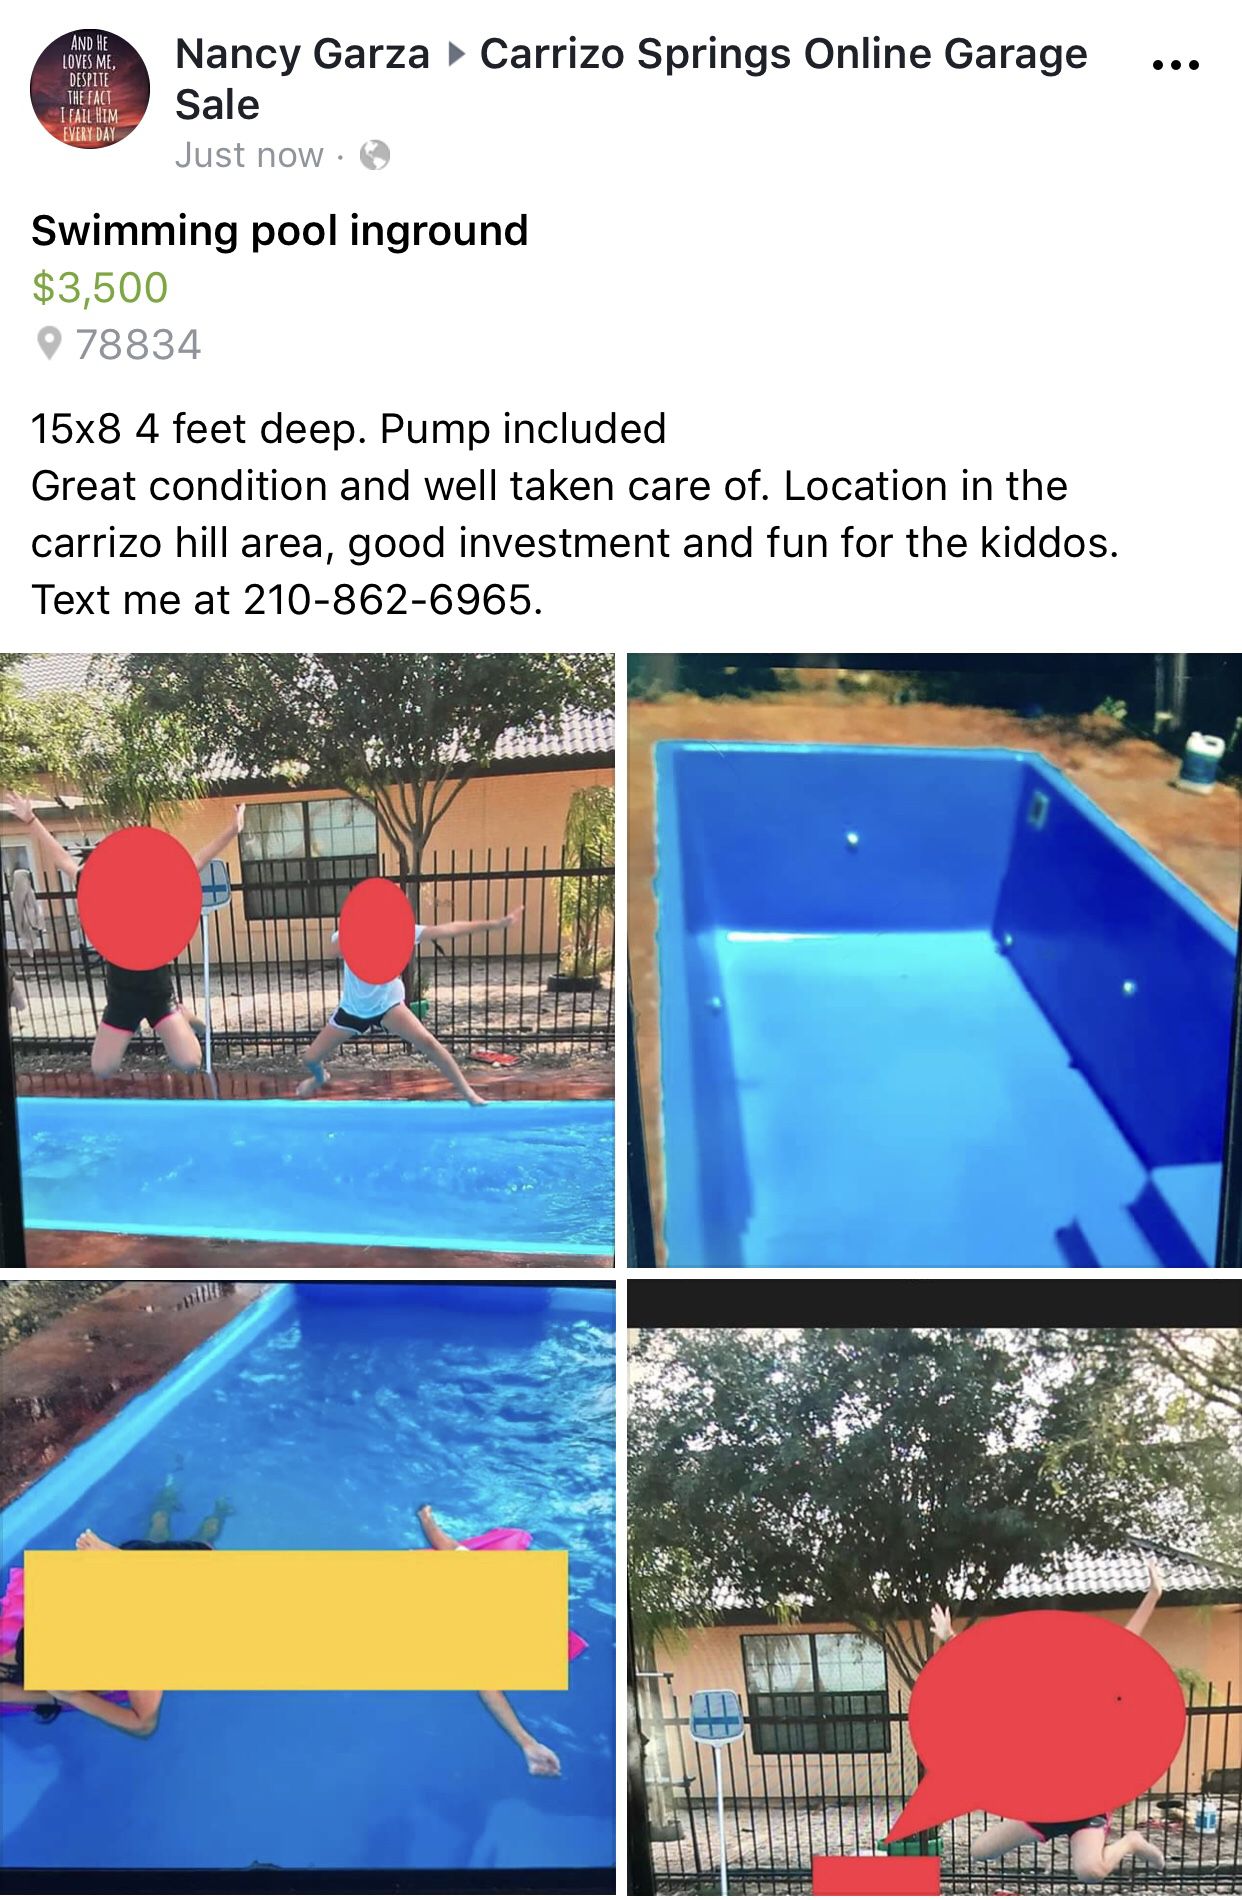 Inground swimming pool located 1.5 hrs south of San Antonio ready for pickup